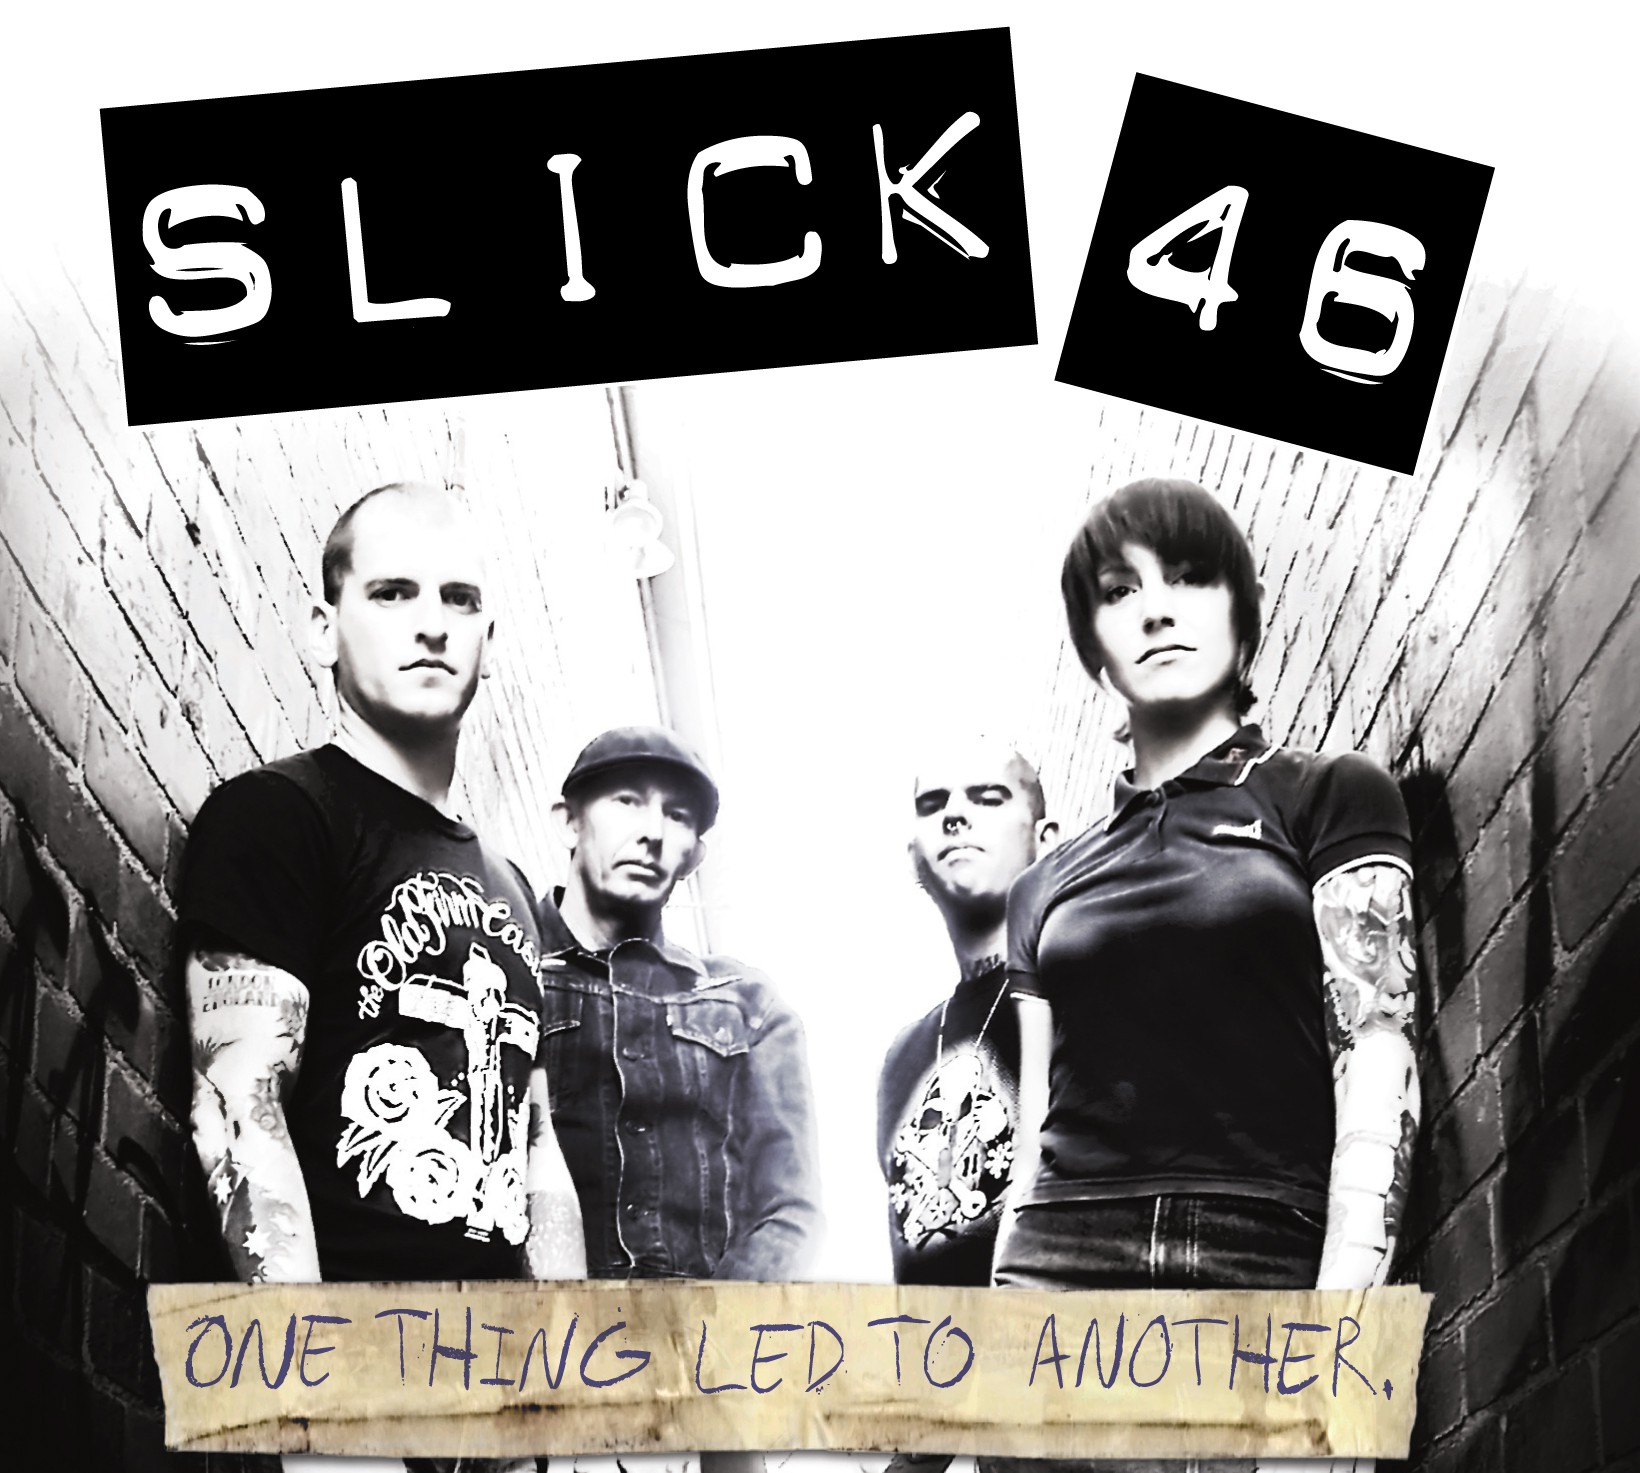 Slick 46 - One thing led to another Digipack CD